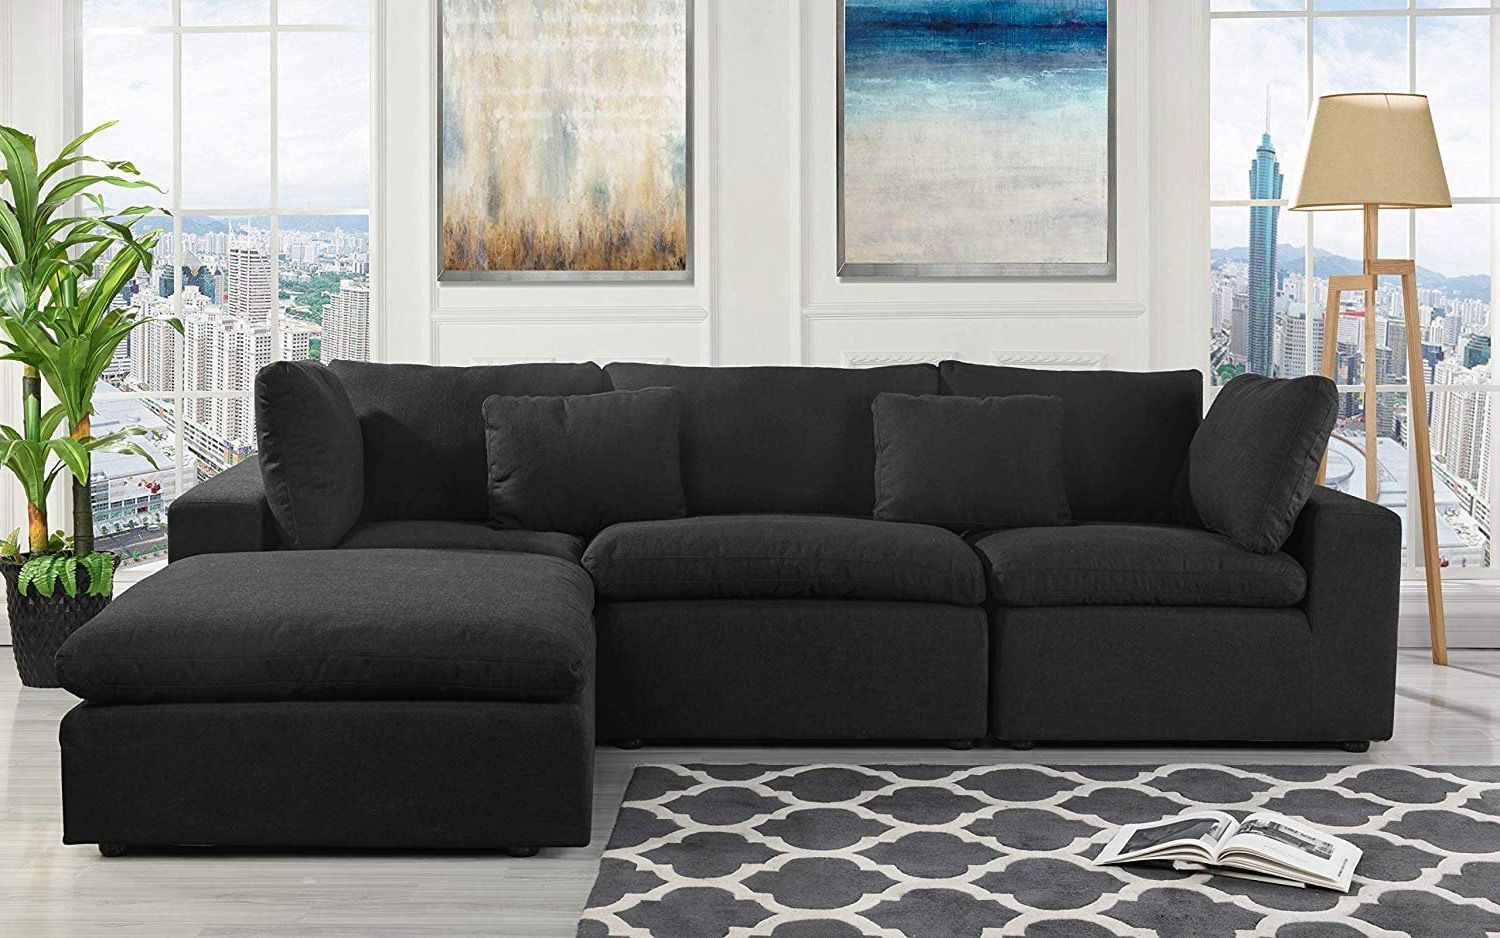 Classic Large Linen Fabric Sectional Sofa, L Shape Couch With Wide For 2017 3 Seat L Shaped Sofas In Black (View 4 of 15)